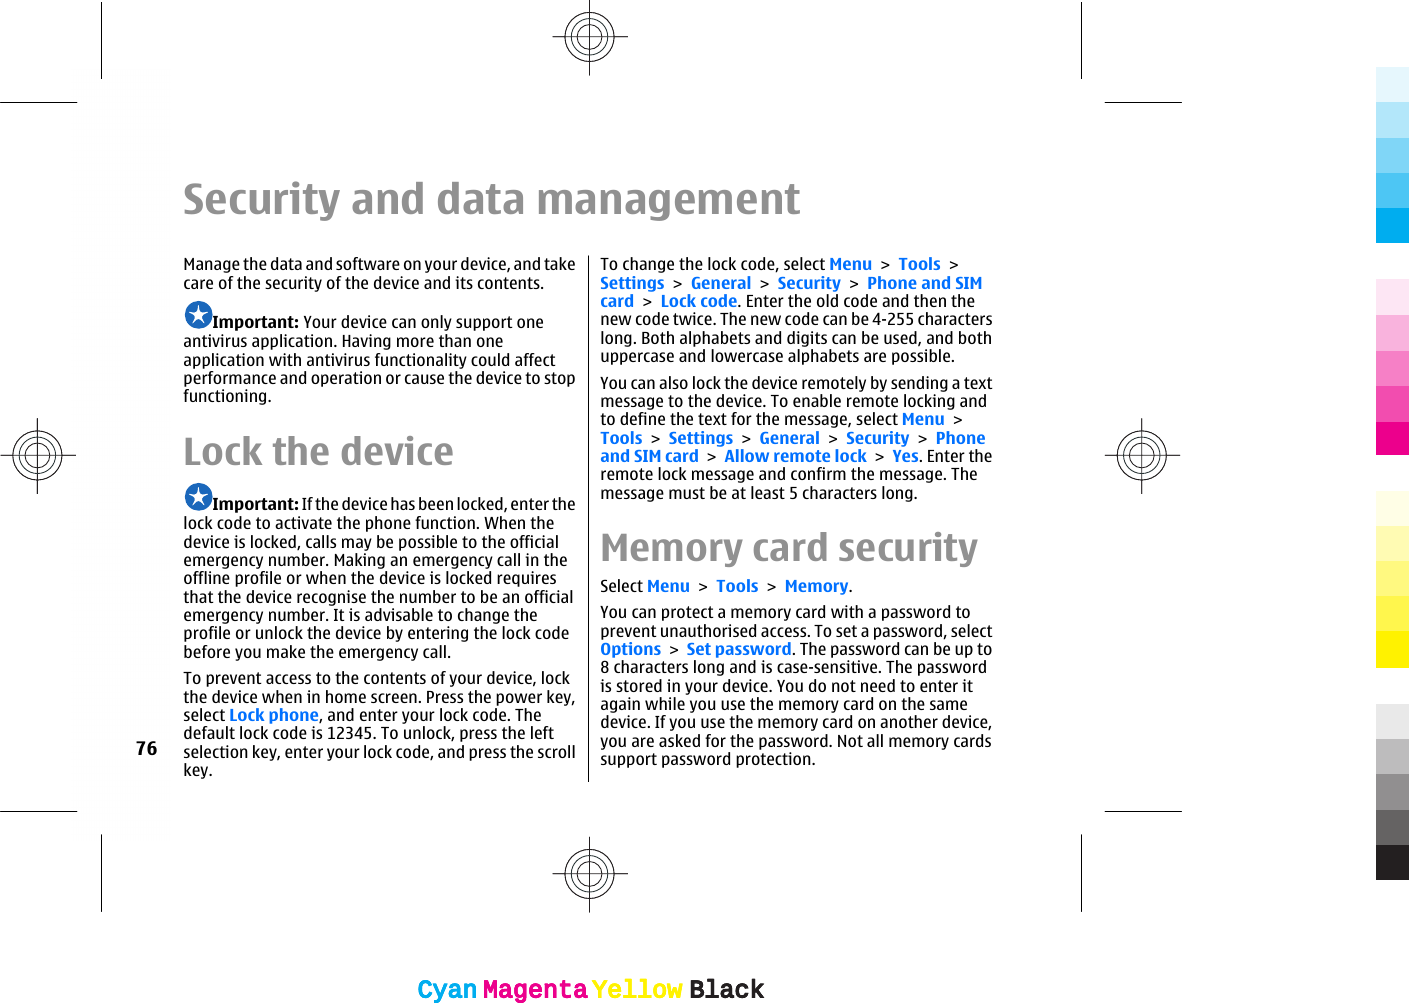 Security and data managementManage the data and software on your device, and takecare of the security of the device and its contents.Important: Your device can only support oneantivirus application. Having more than oneapplication with antivirus functionality could affectperformance and operation or cause the device to stopfunctioning.Lock the deviceImportant: If the device has been locked, enter thelock code to activate the phone function. When thedevice is locked, calls may be possible to the officialemergency number. Making an emergency call in theoffline profile or when the device is locked requiresthat the device recognise the number to be an officialemergency number. It is advisable to change theprofile or unlock the device by entering the lock codebefore you make the emergency call.To prevent access to the contents of your device, lockthe device when in home screen. Press the power key,select Lock phone, and enter your lock code. Thedefault lock code is 12345. To unlock, press the leftselection key, enter your lock code, and press the scrollkey.To change the lock code, select Menu &gt; Tools &gt;Settings &gt; General &gt; Security &gt; Phone and SIMcard &gt; Lock code. Enter the old code and then thenew code twice. The new code can be 4-255 characterslong. Both alphabets and digits can be used, and bothuppercase and lowercase alphabets are possible.You can also lock the device remotely by sending a textmessage to the device. To enable remote locking andto define the text for the message, select Menu &gt;Tools &gt; Settings &gt; General &gt; Security &gt; Phoneand SIM card &gt; Allow remote lock &gt; Yes. Enter theremote lock message and confirm the message. Themessage must be at least 5 characters long.Memory card securitySelect Menu &gt; Tools &gt; Memory.You can protect a memory card with a password toprevent unauthorised access. To set a password, selectOptions &gt; Set password. The password can be up to8 characters long and is case-sensitive. The passwordis stored in your device. You do not need to enter itagain while you use the memory card on the samedevice. If you use the memory card on another device,you are asked for the password. Not all memory cardssupport password protection.76CyanCyanMagentaMagentaYellowYellowBlackBlackCyanCyanMagentaMagentaYellowYellowBlackBlack